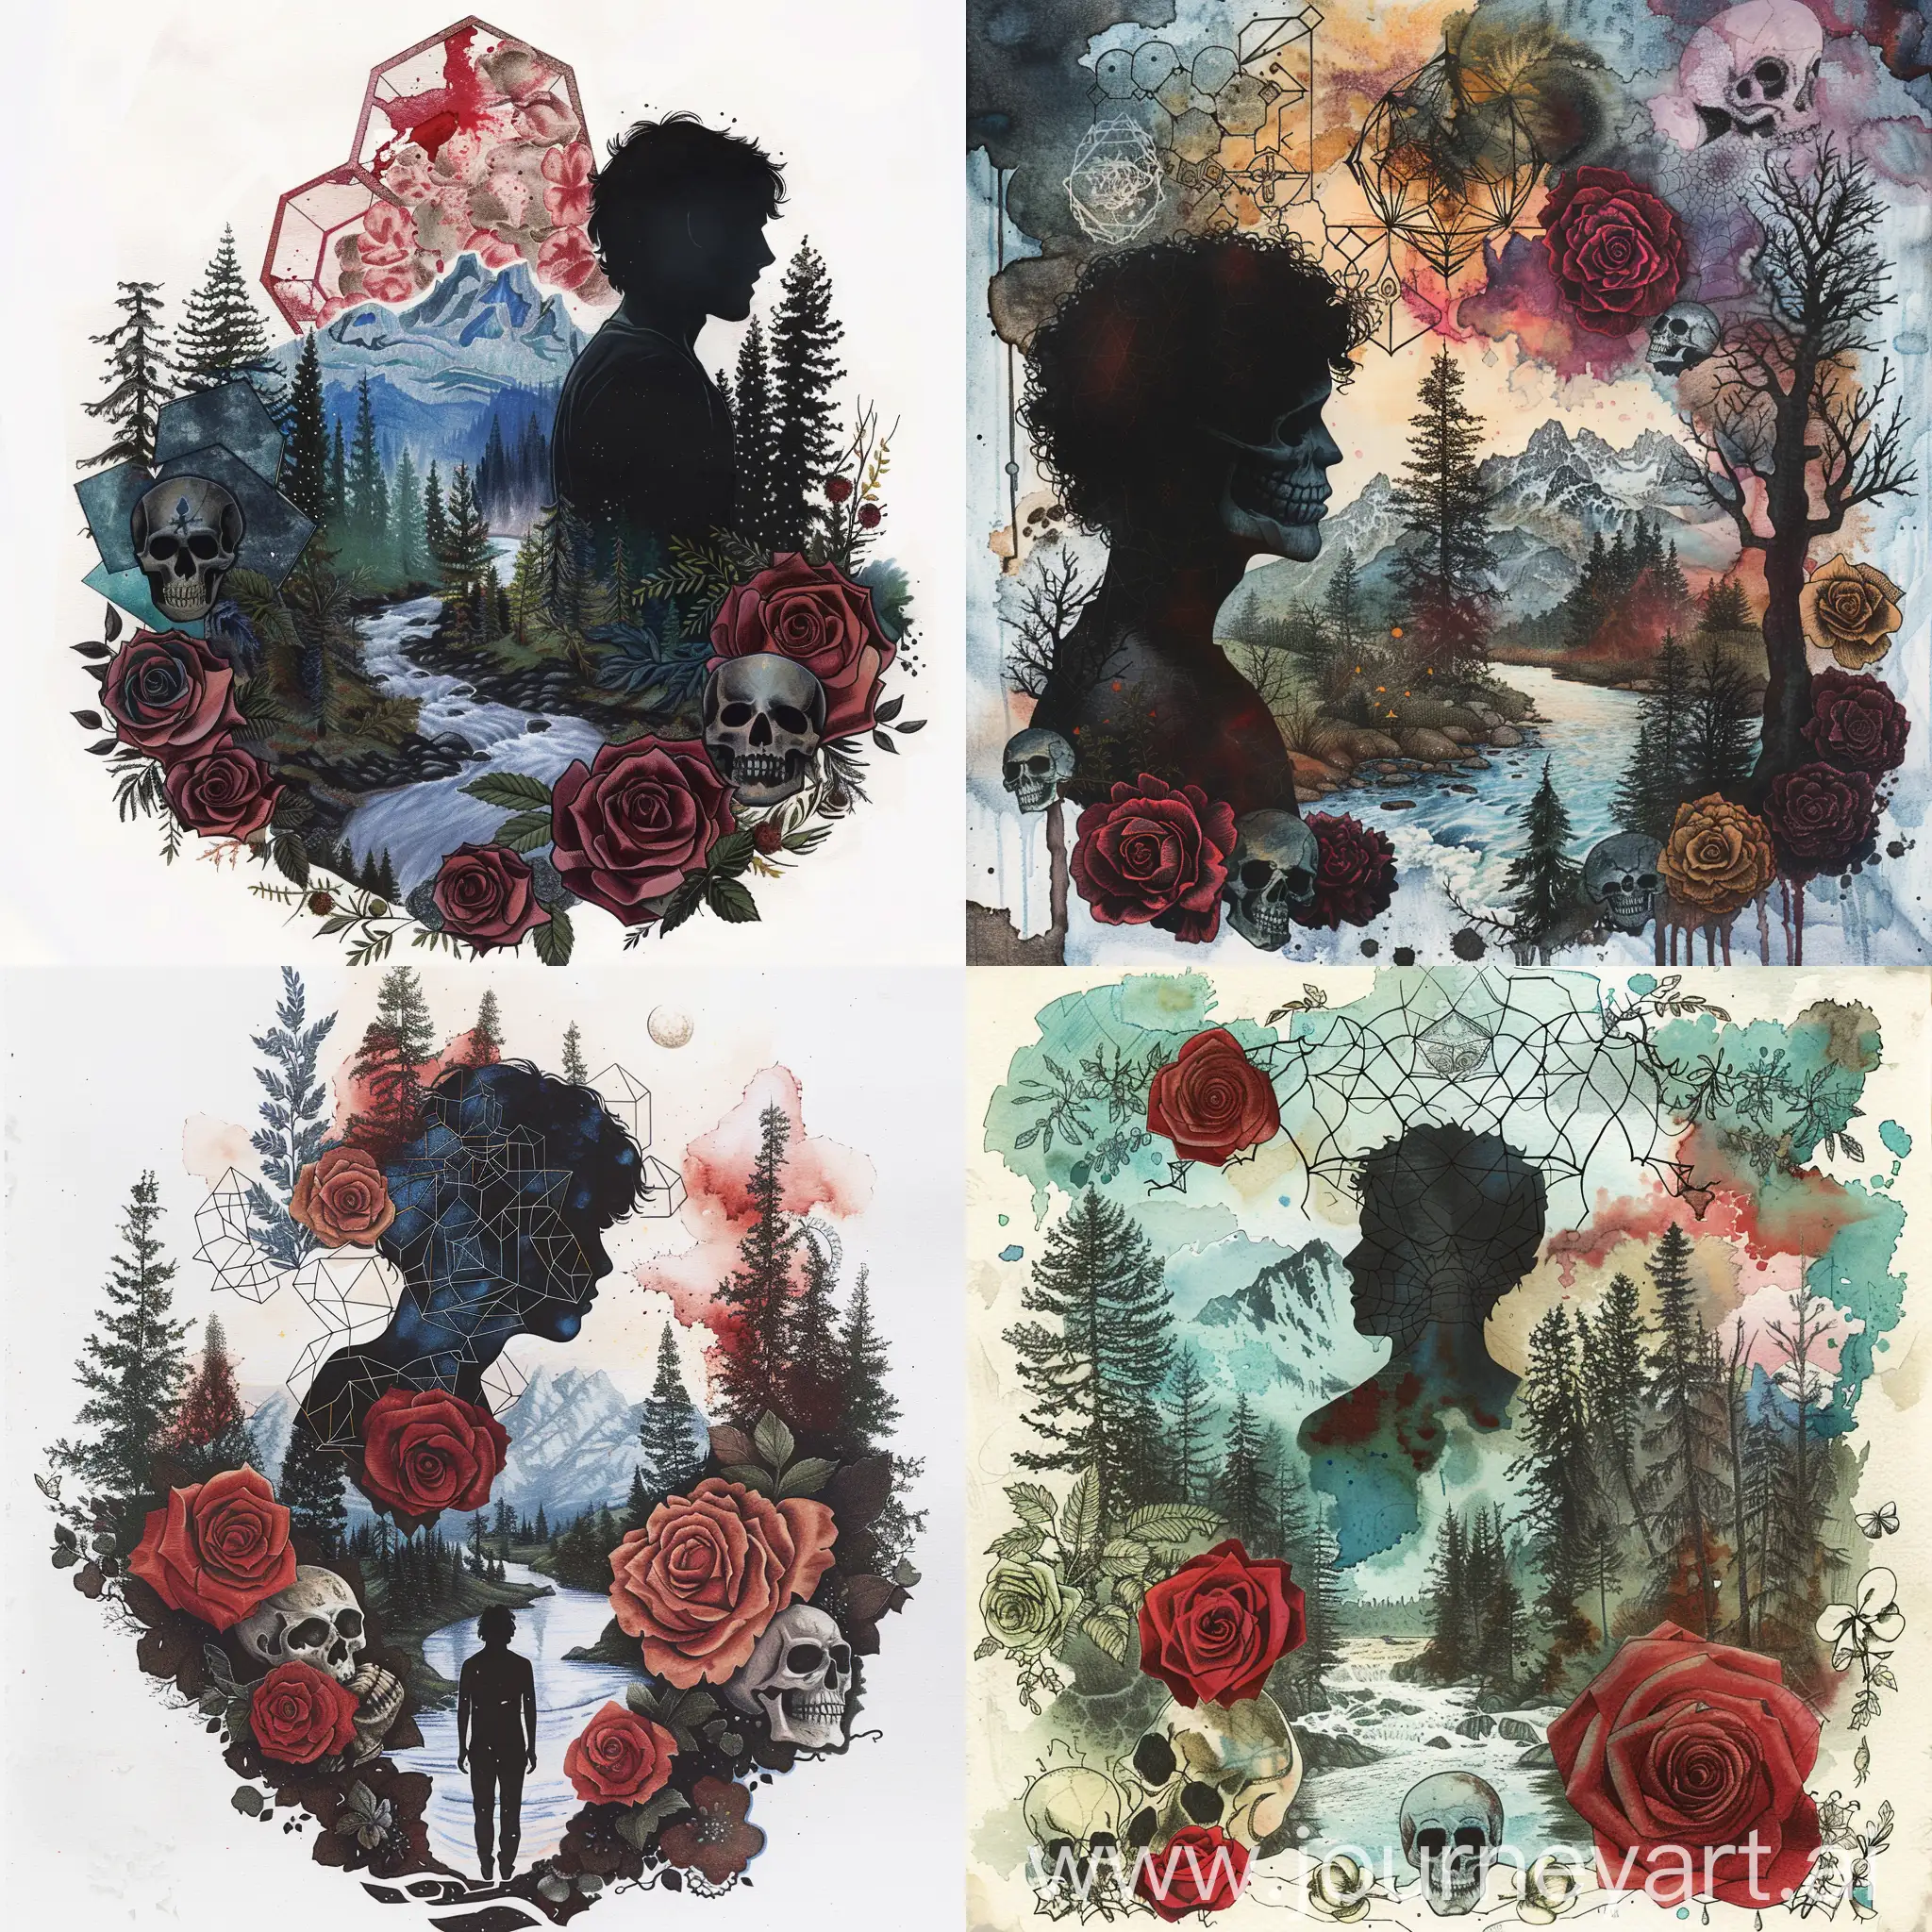 Illustrated-Collage-Young-Man-Amidst-Roses-Skulls-and-Fantasy-with-Nature-Background